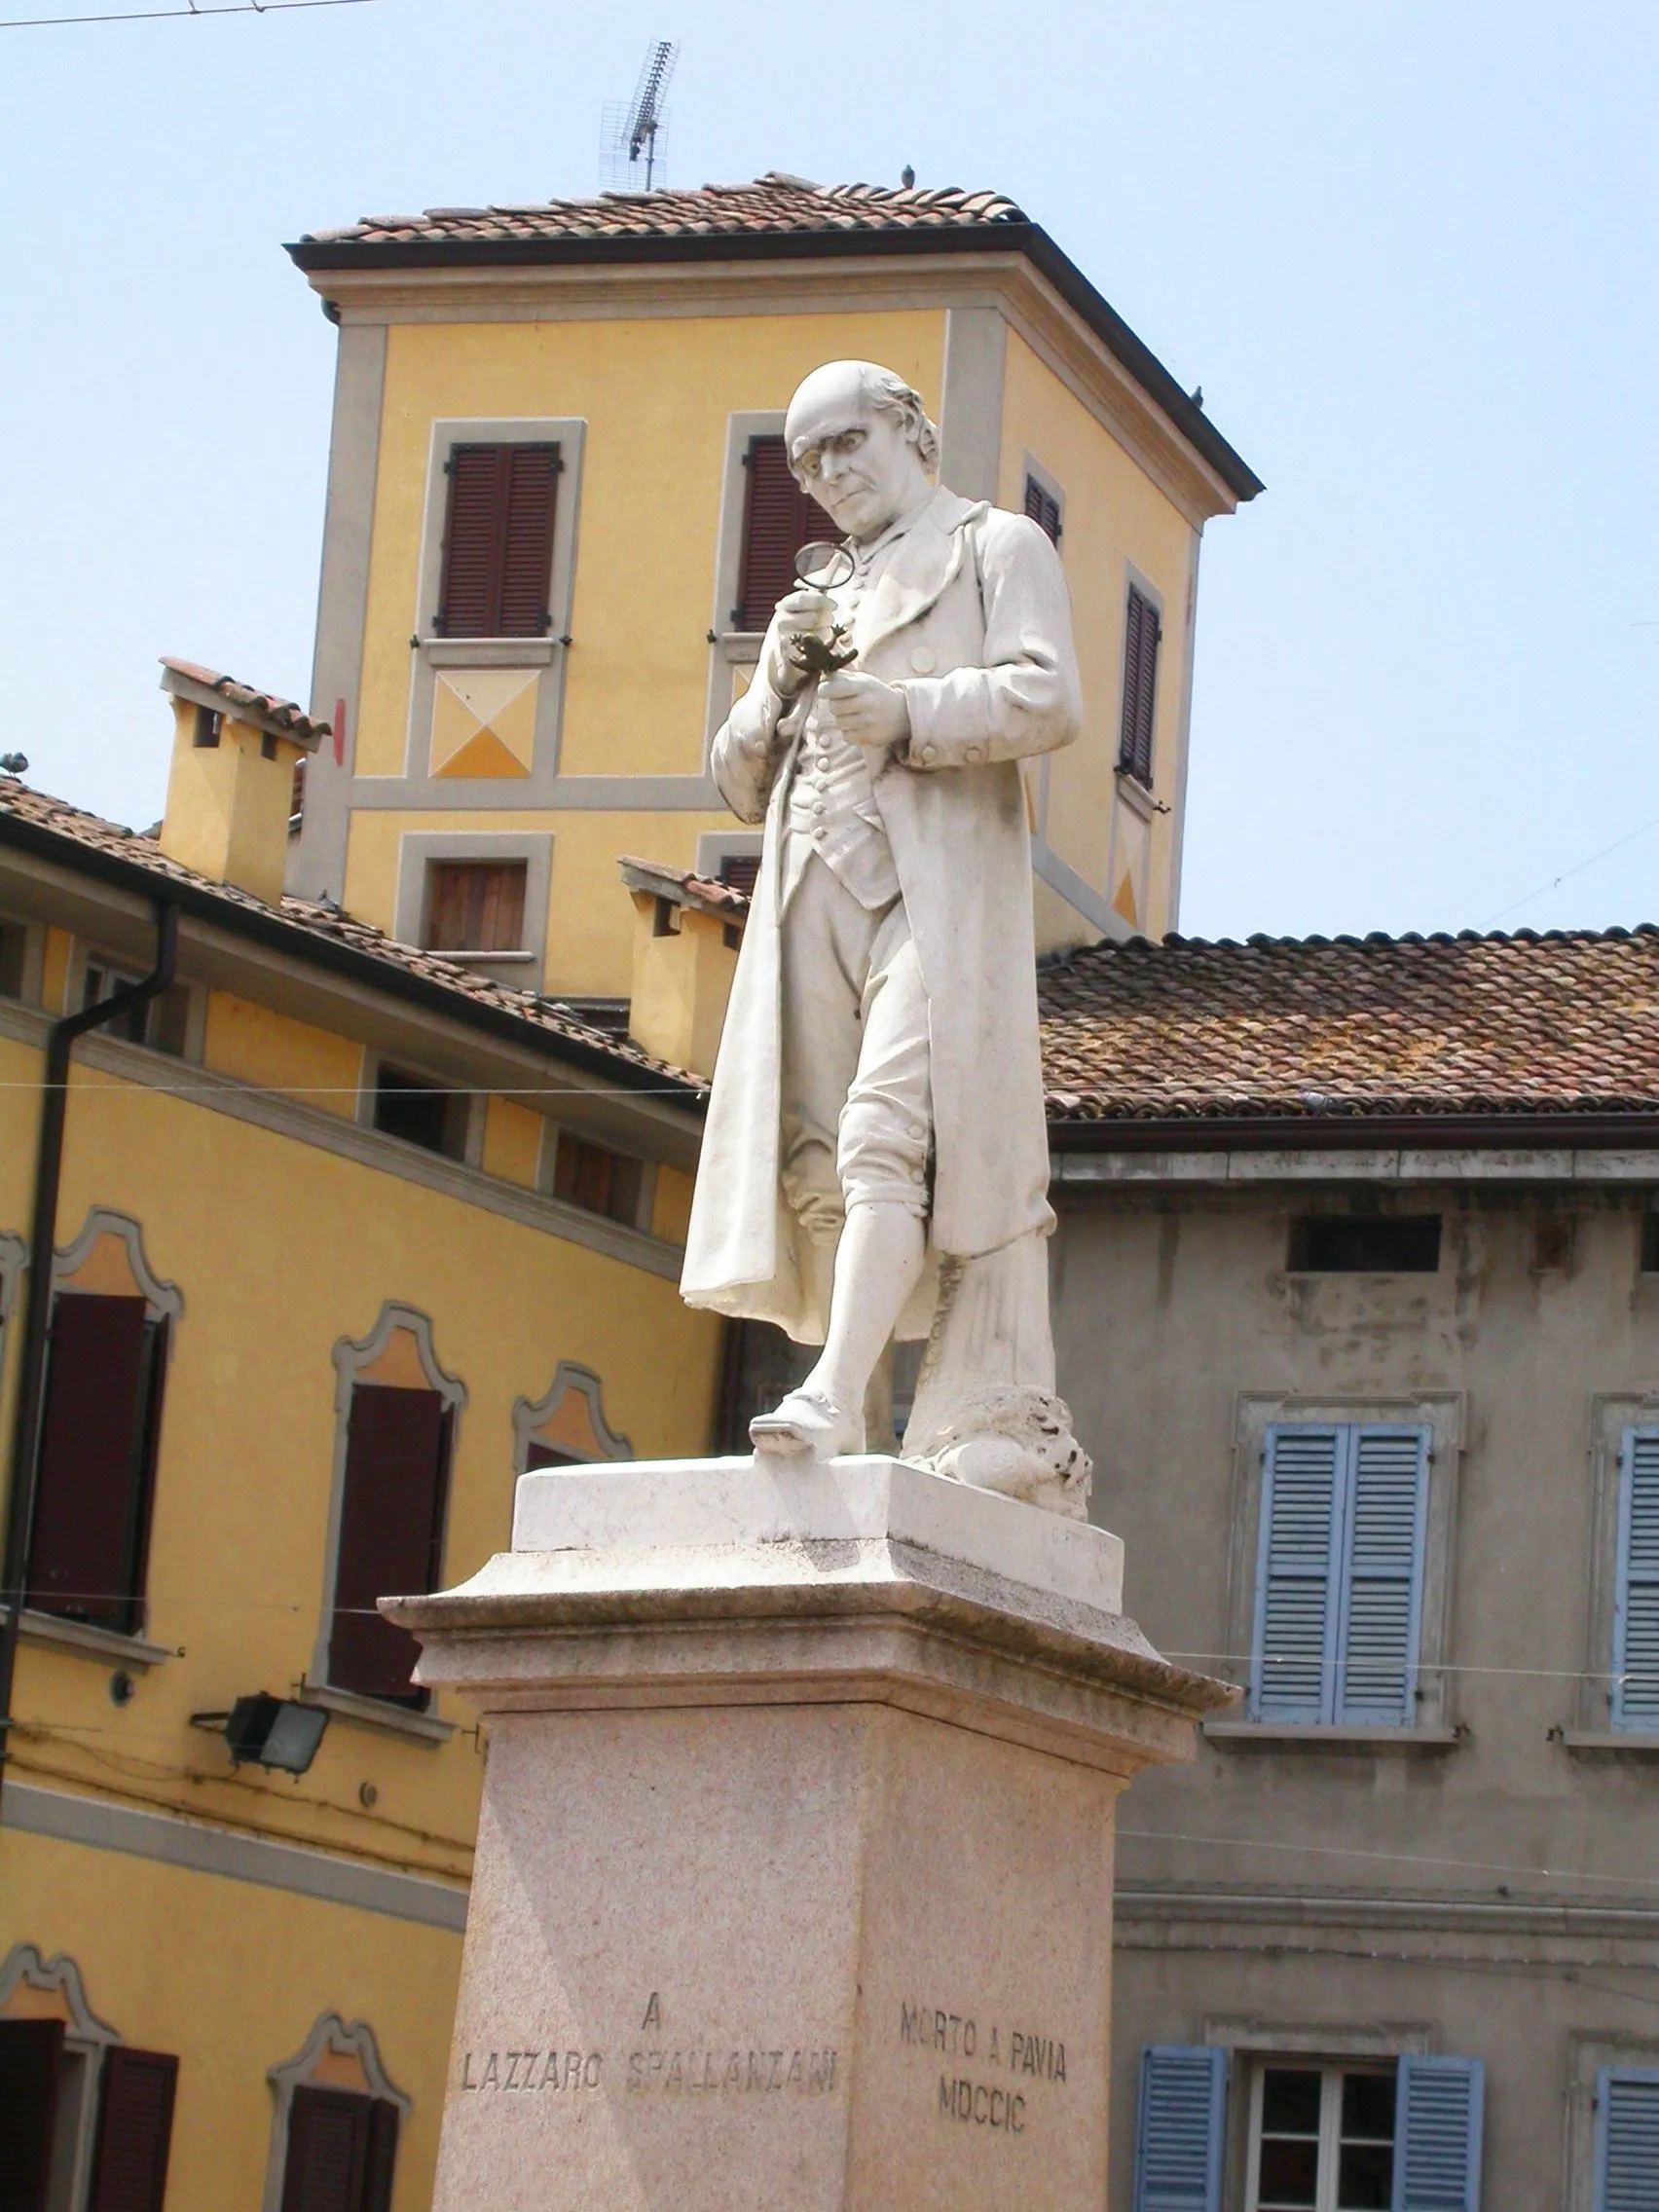 Photo showing: Monument in Scandiano of the scientist Lazzaro Spallanzani, who lived and worked in Scandiano. The monument was inaugurated on Oct 21 1888, and is a work by sculptor Guglielmo Fornaciari (1859-1930)